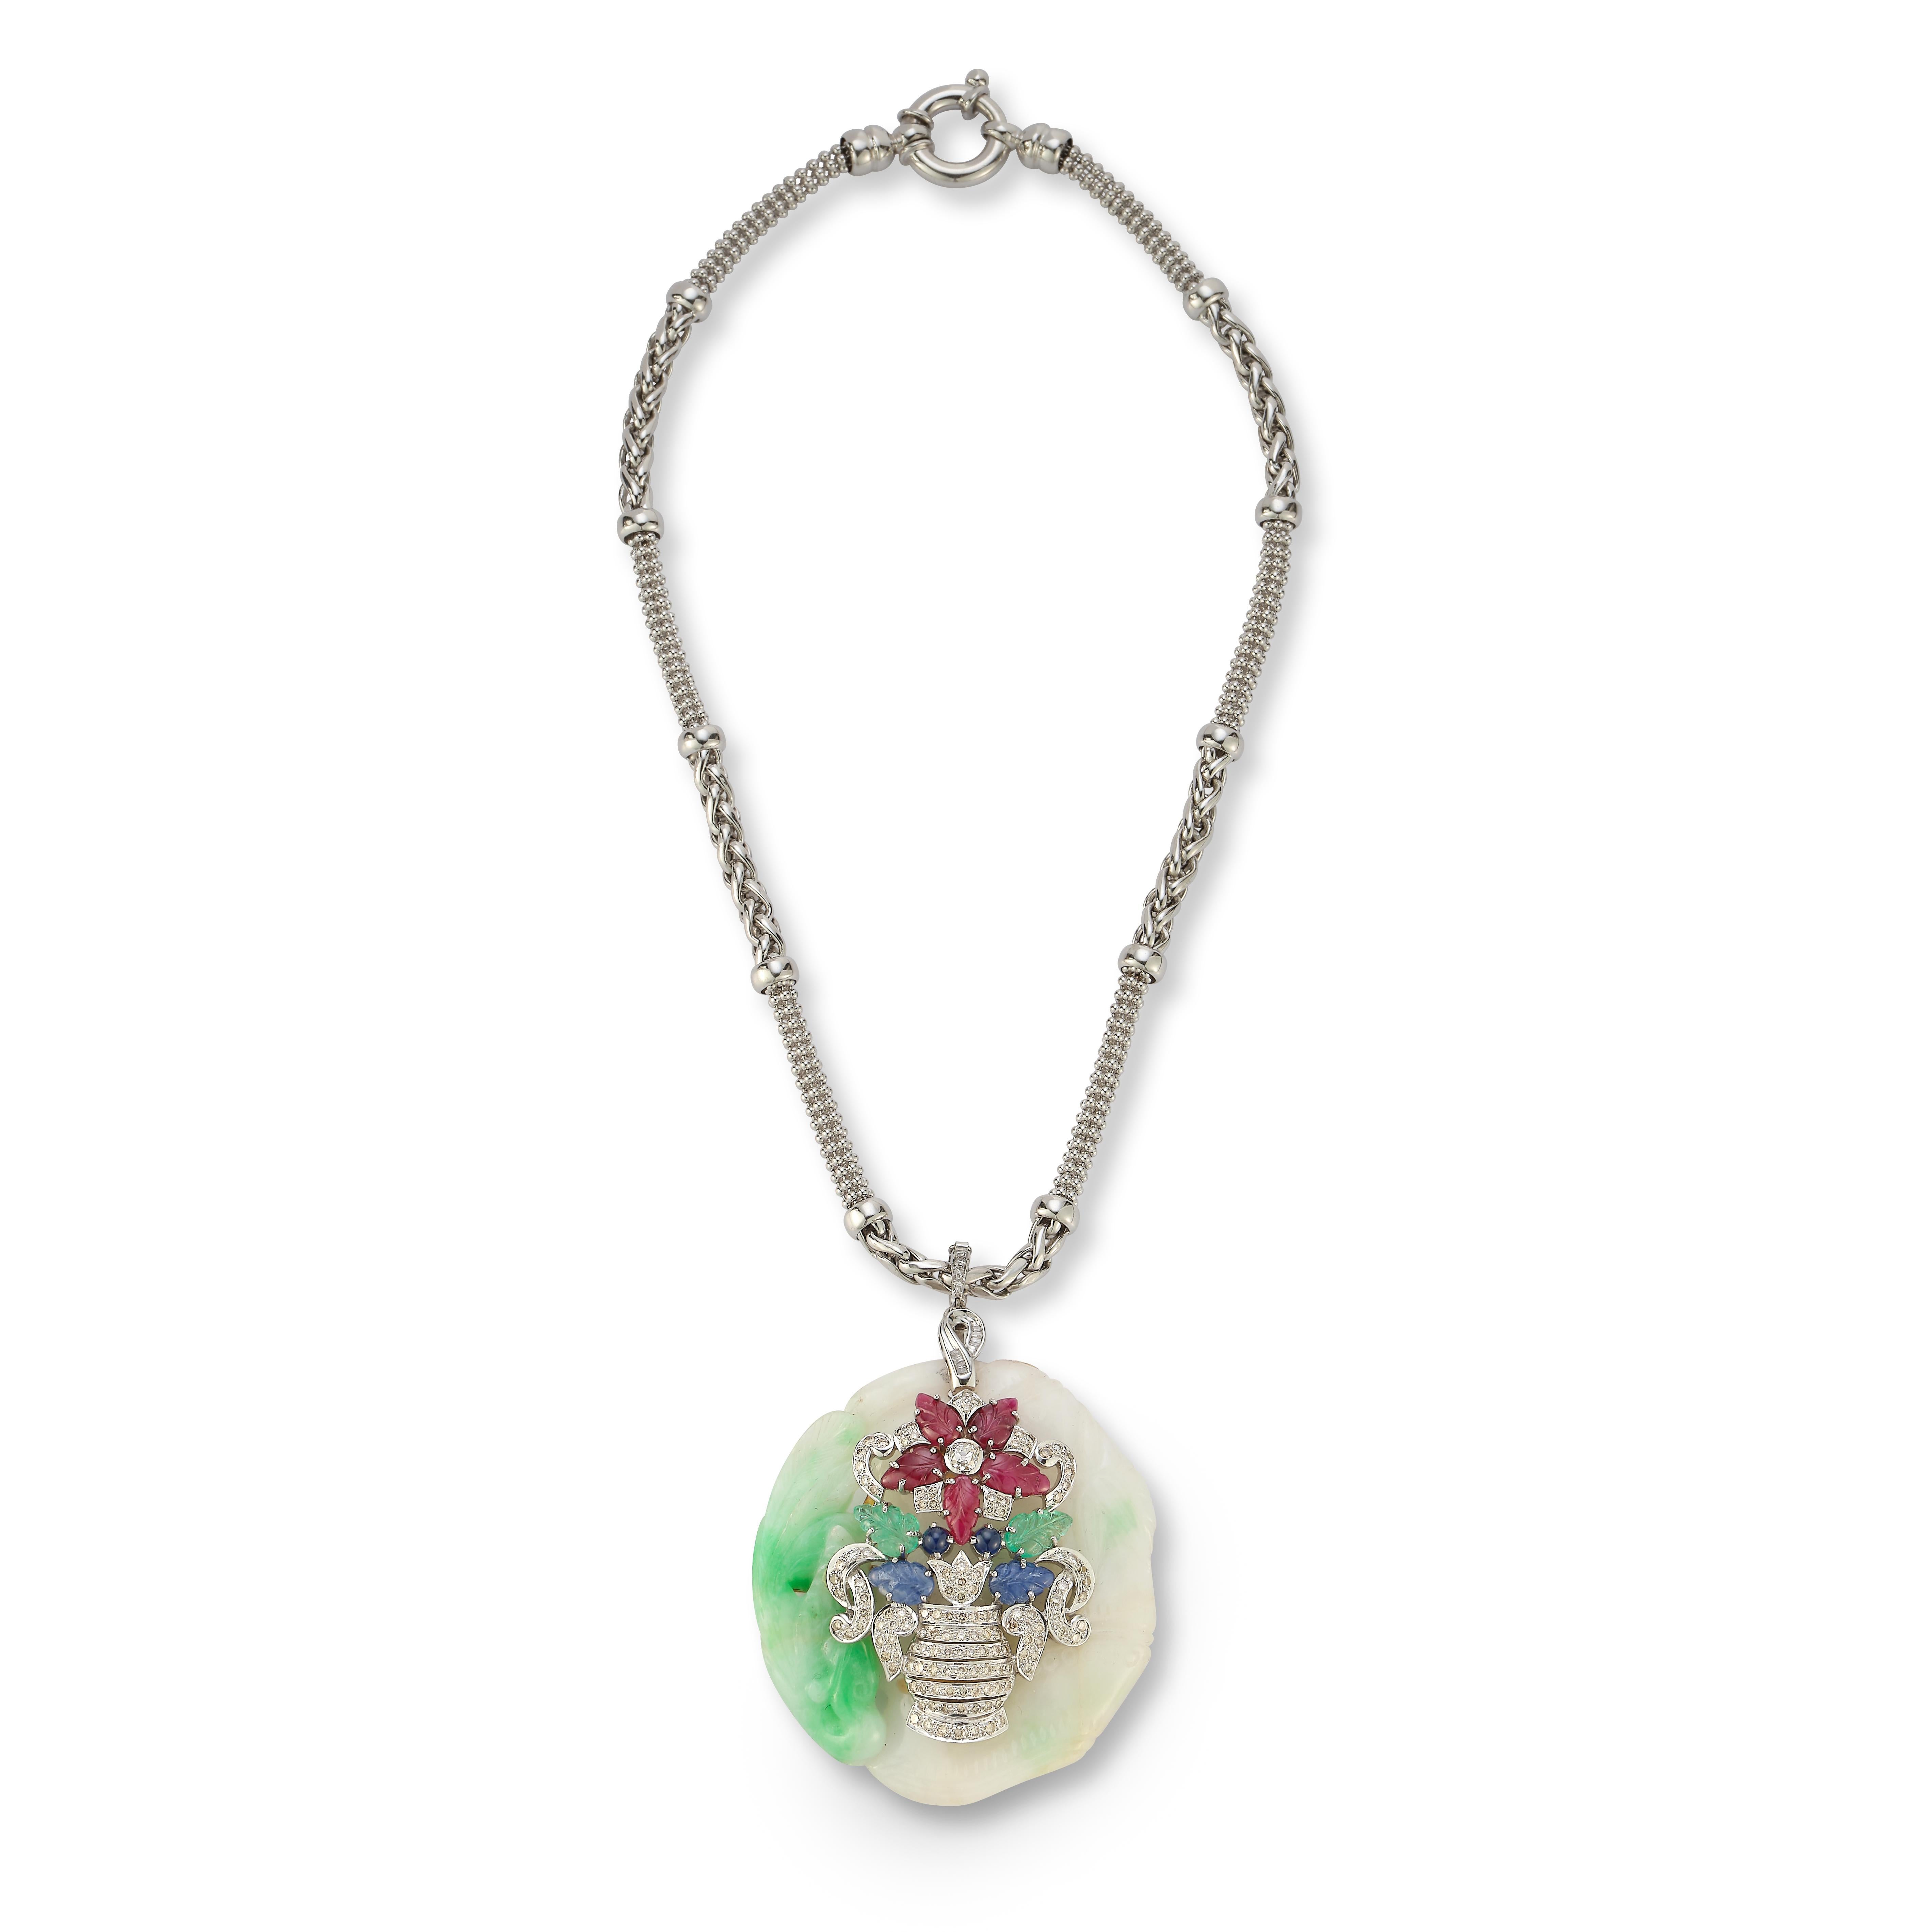 Tutti Frutti Jade Giardinetto Flower Pendant Necklace

Carved diamonds, rubies, sapphires, and emeralds set in 14k white gold,. Convertible into brooch

Measurements: Chain length 16